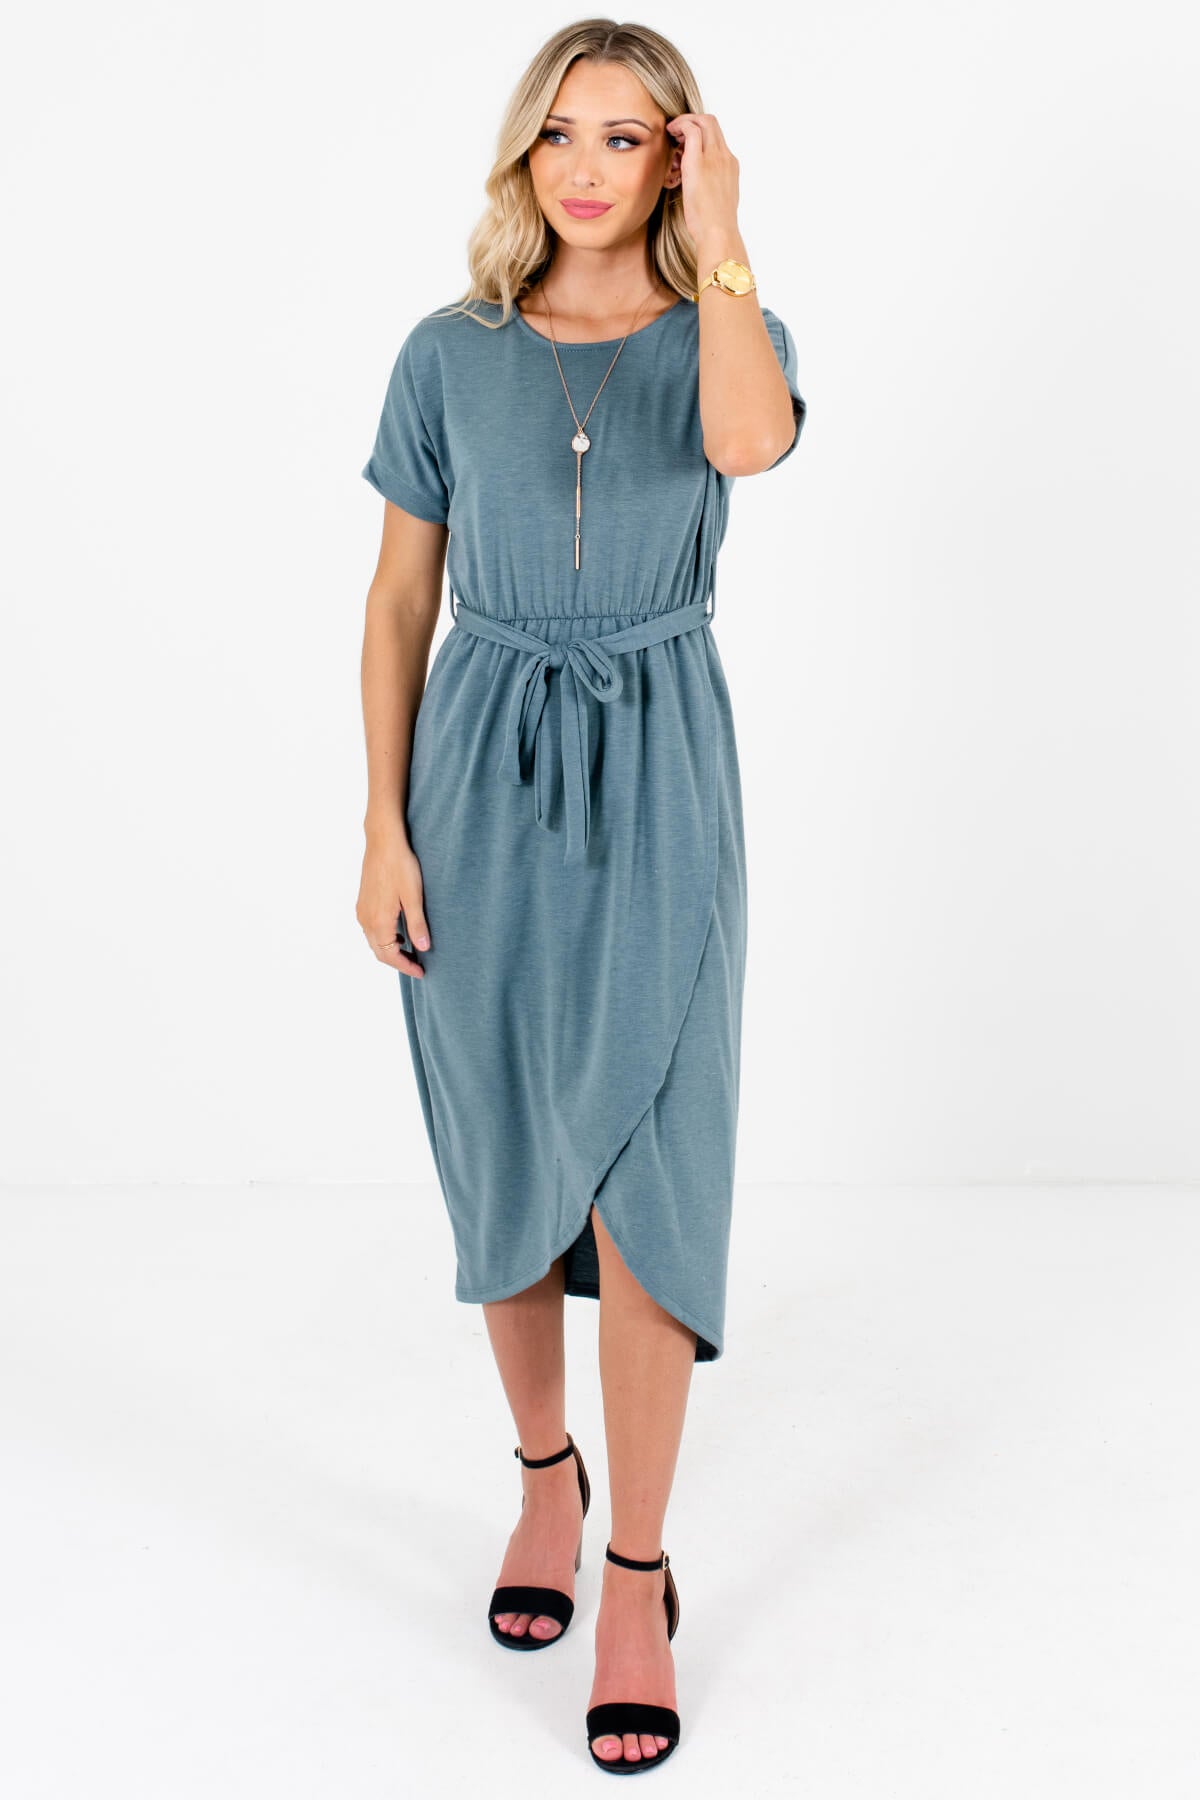 Teal Blue Cute and Comfortable Boutique Knee-Length Dresses for Women